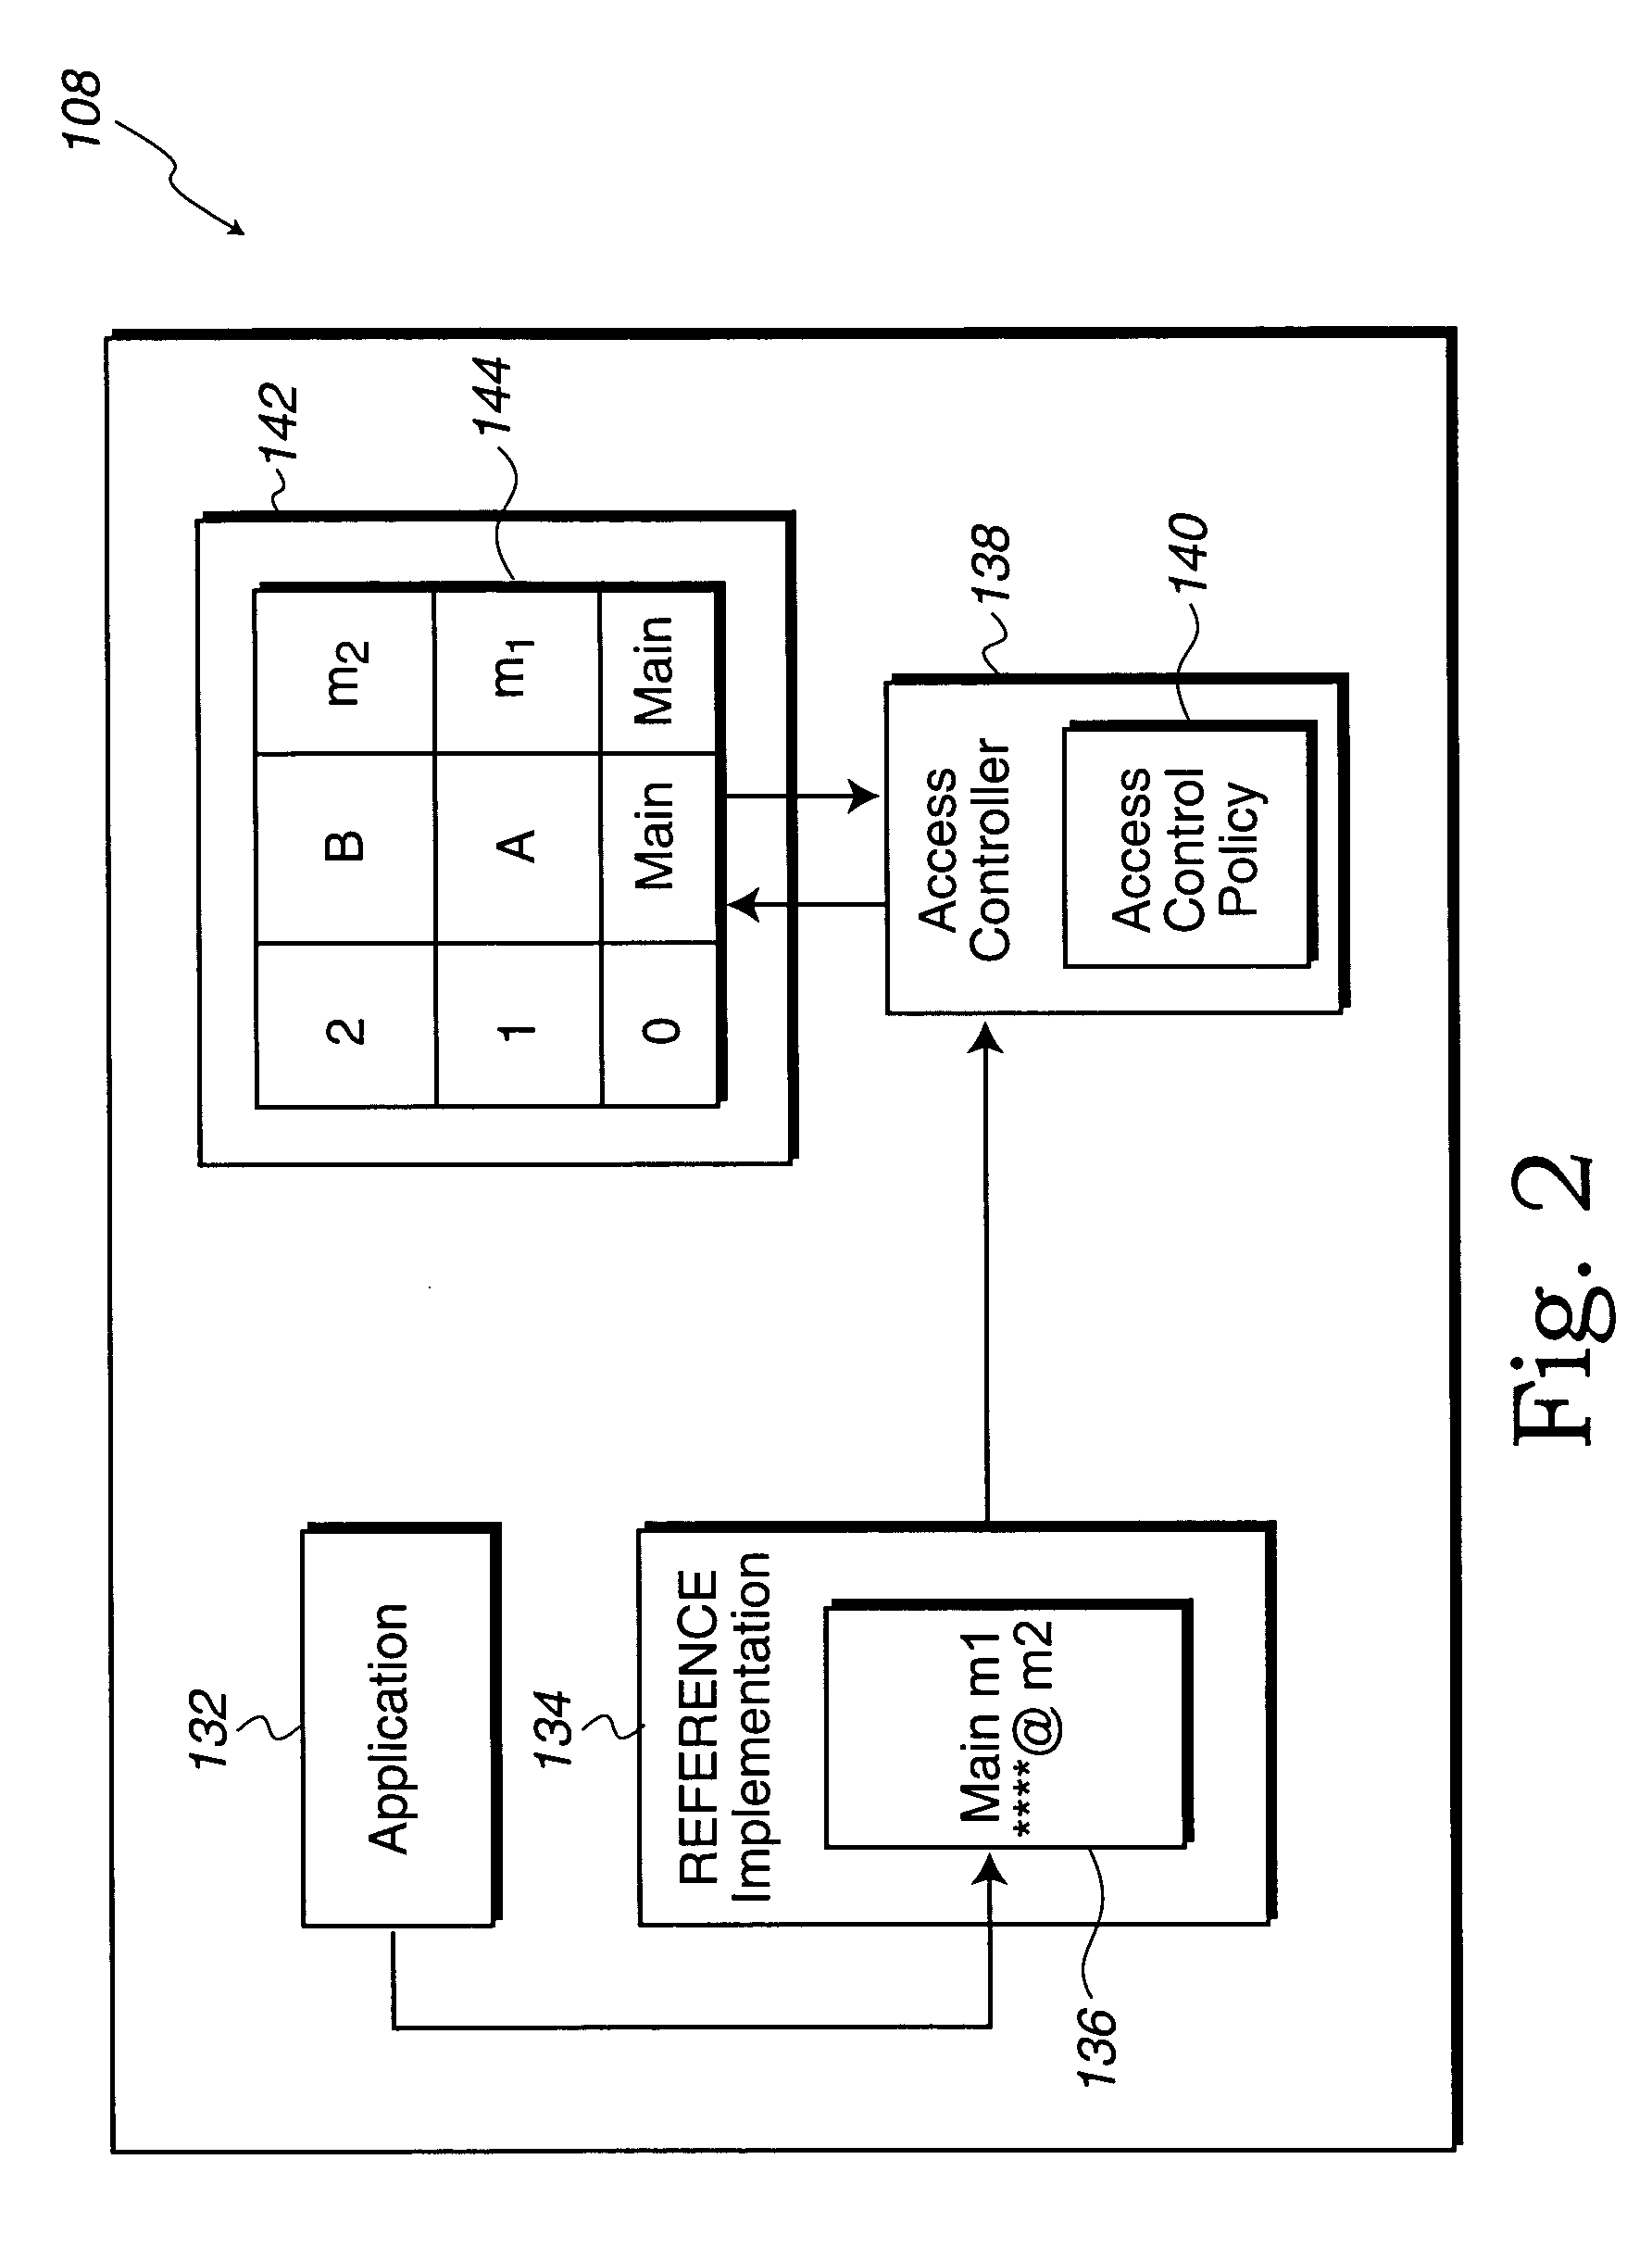 Method and system for detecting deprecated elements during runtime